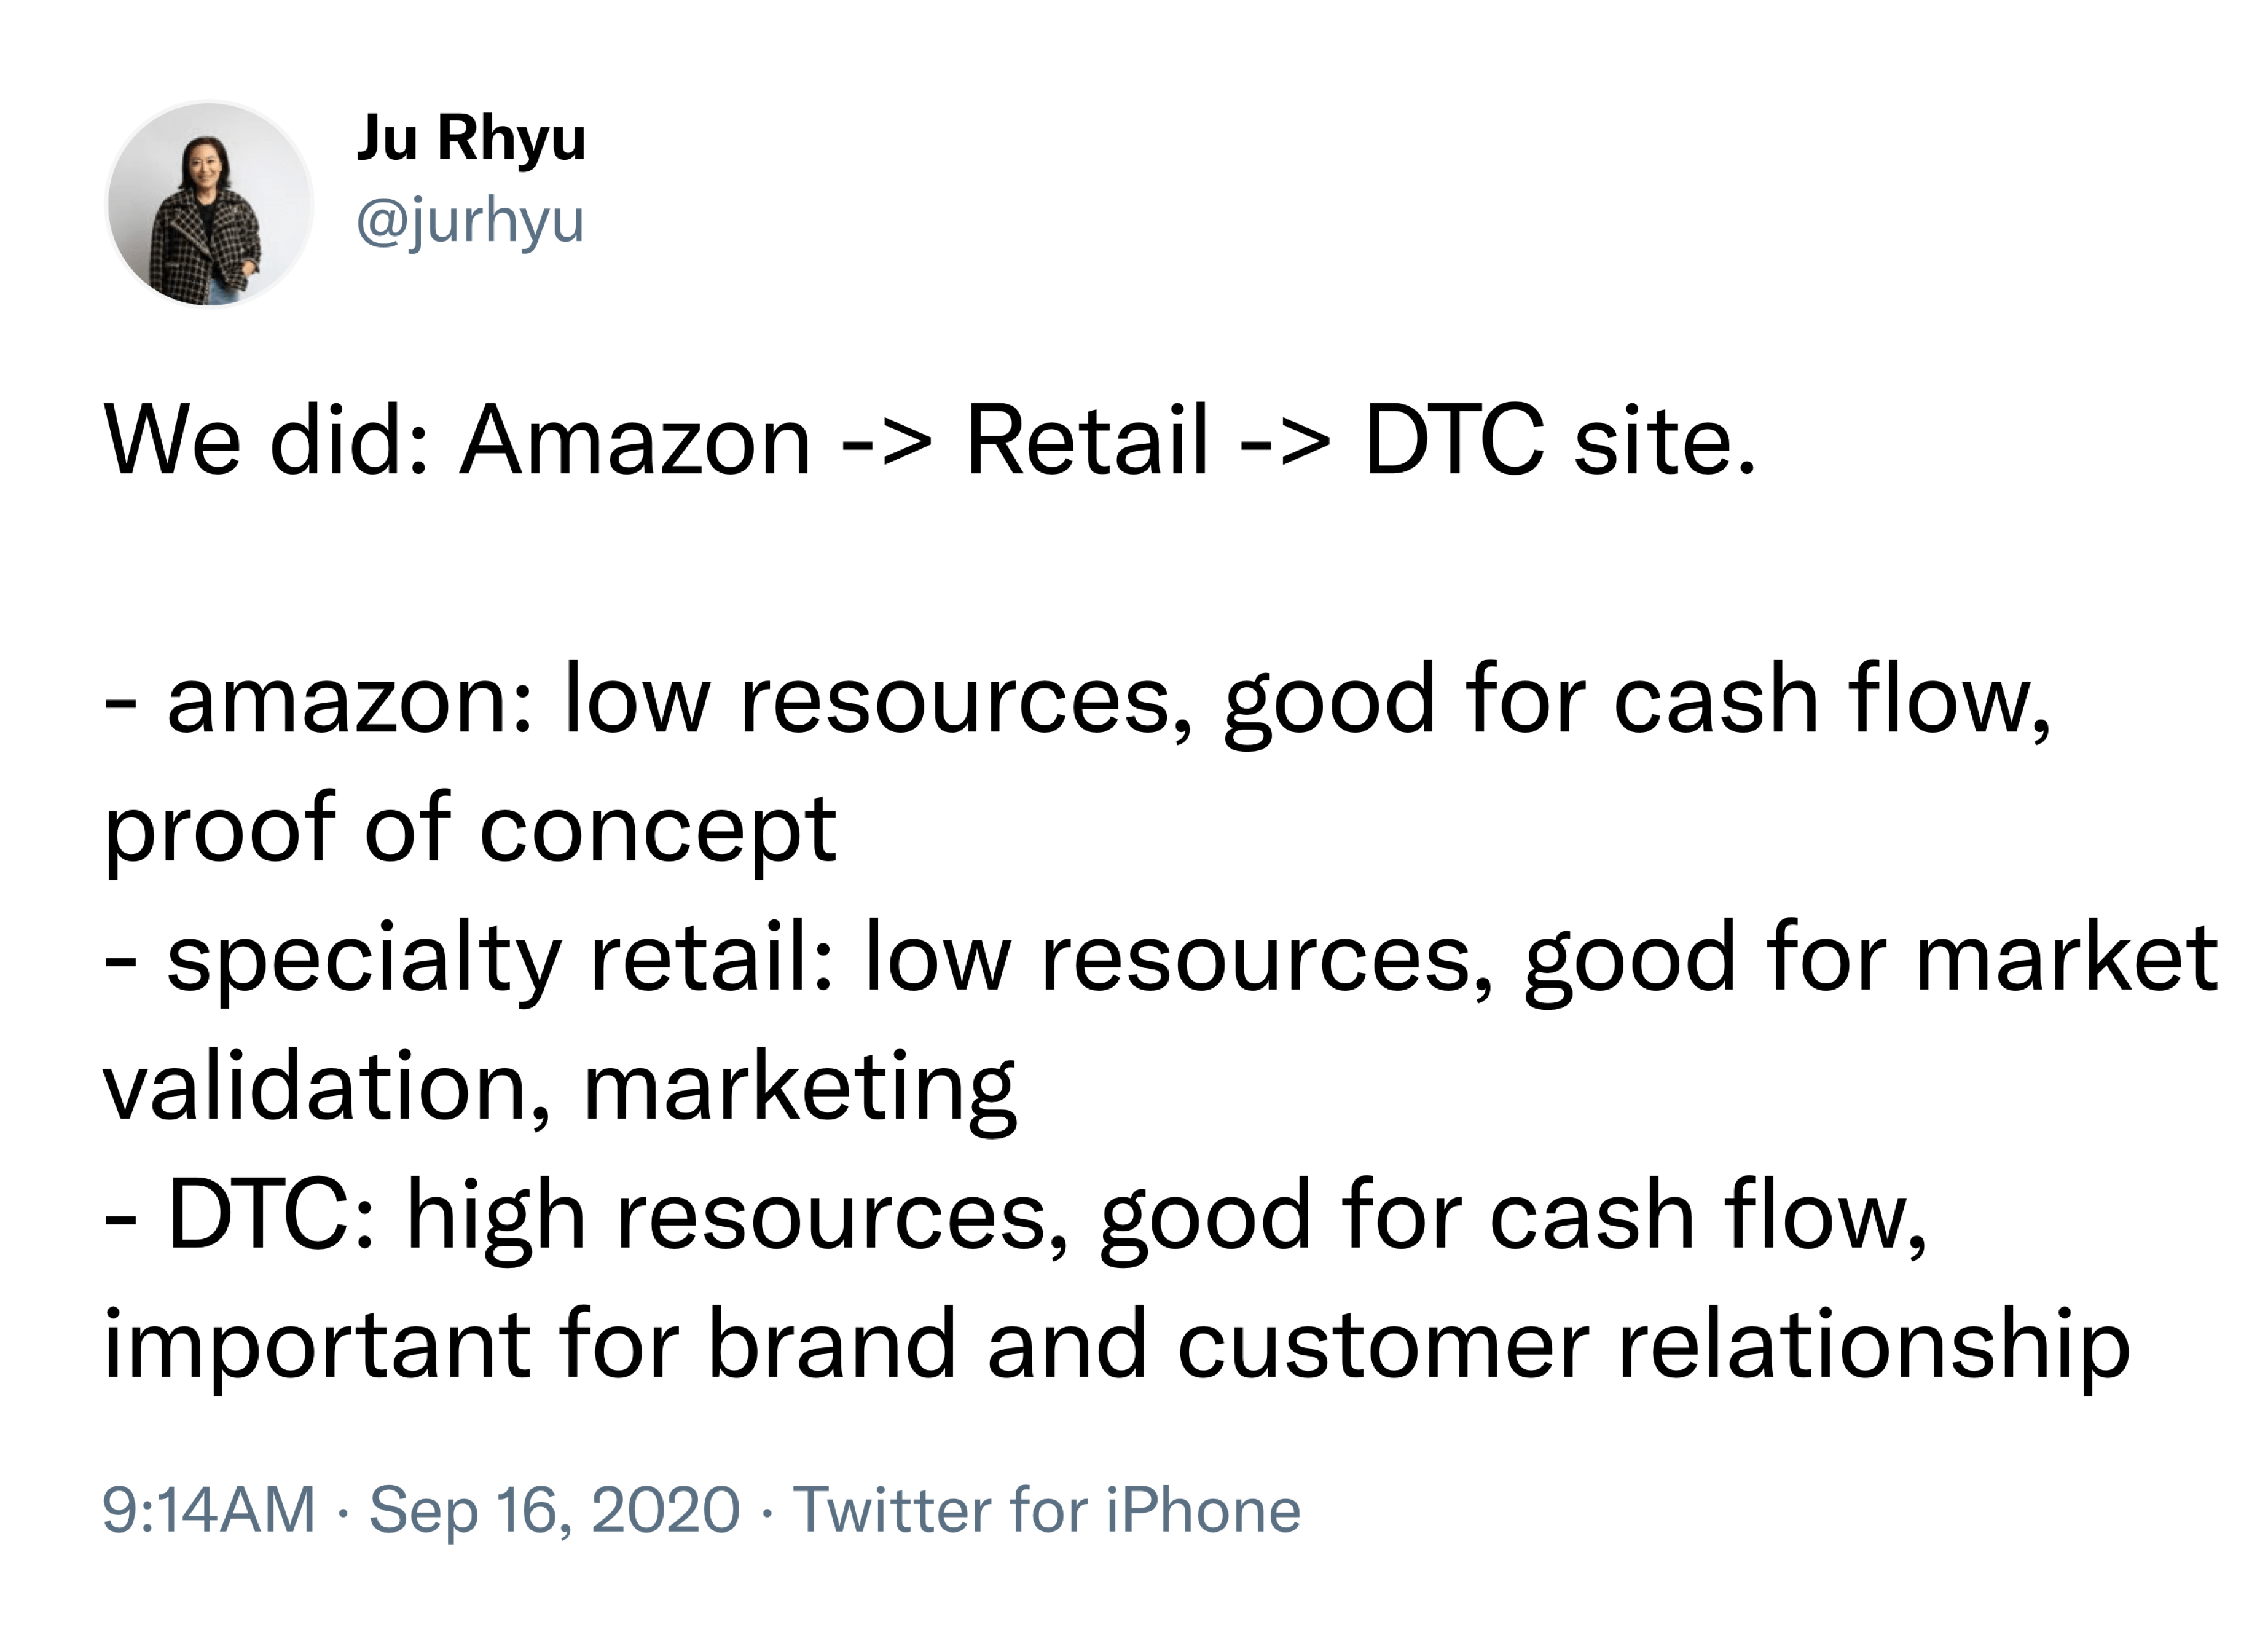 Ju Rhyu, co-founder and CEO of Hero Cosmetics on Twitter